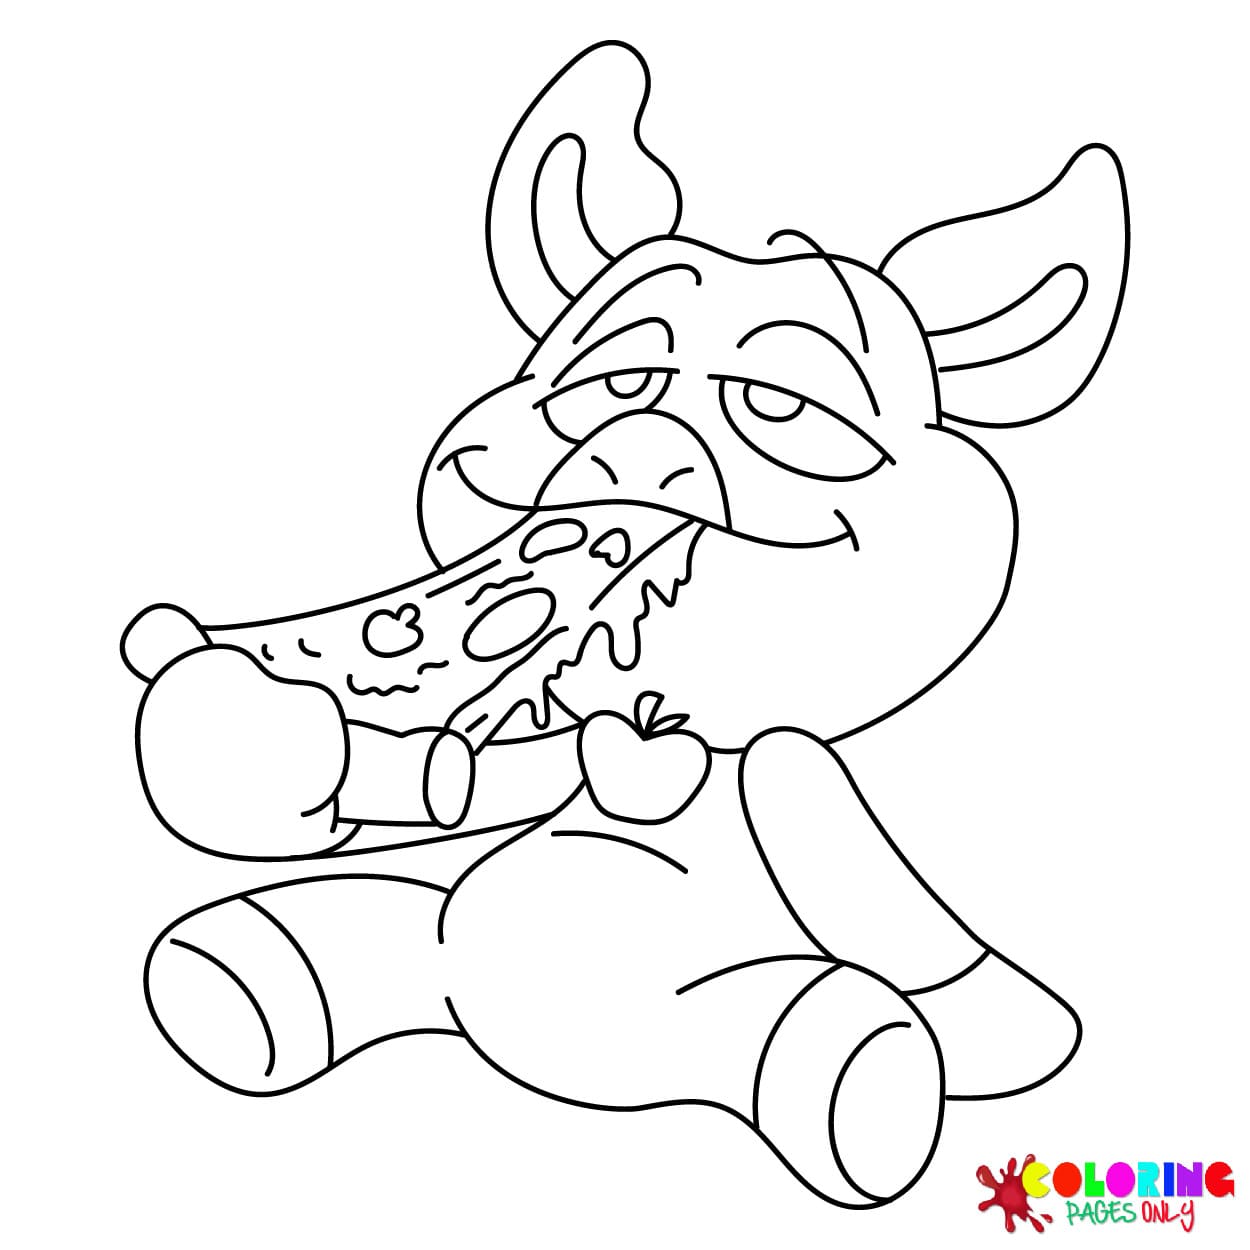 PickyPiggy Coloring Pages